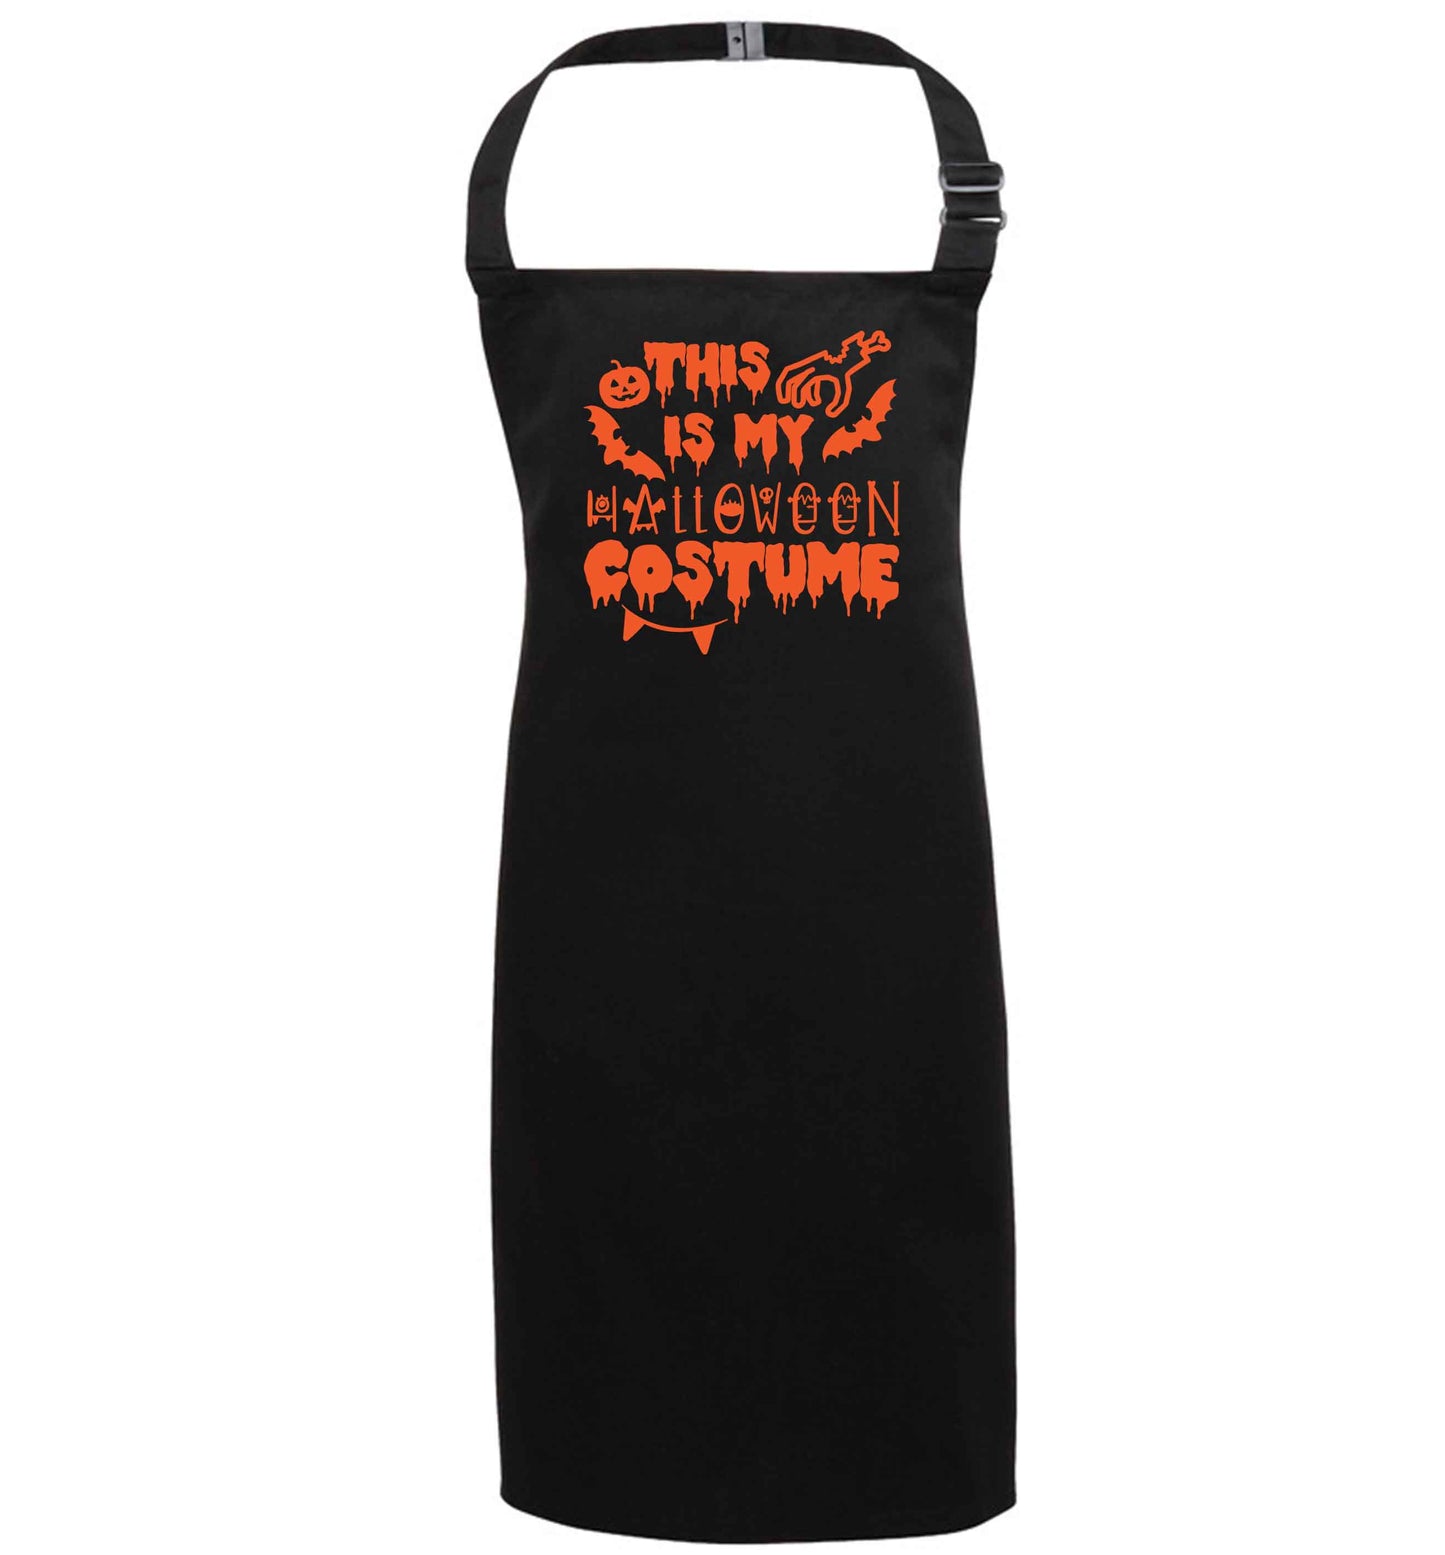 This is my halloween costume black apron 7-10 years